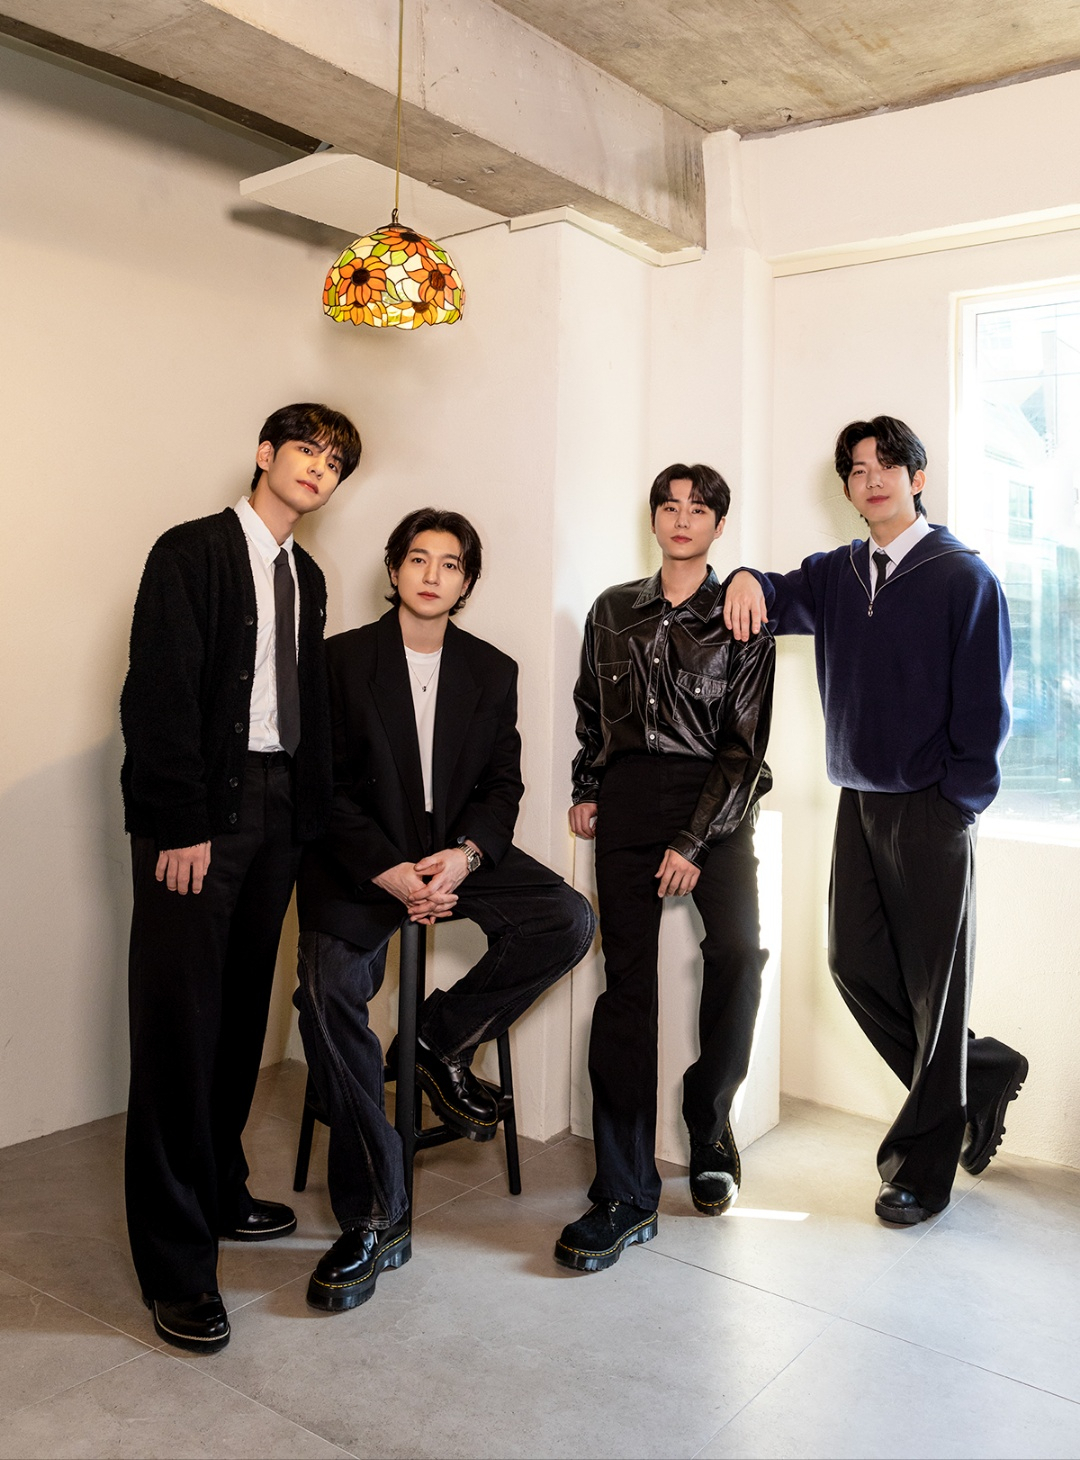 From left: Day6 members Wonpil, Sungjin, Young K and Dowoon (JYP Entertainment)